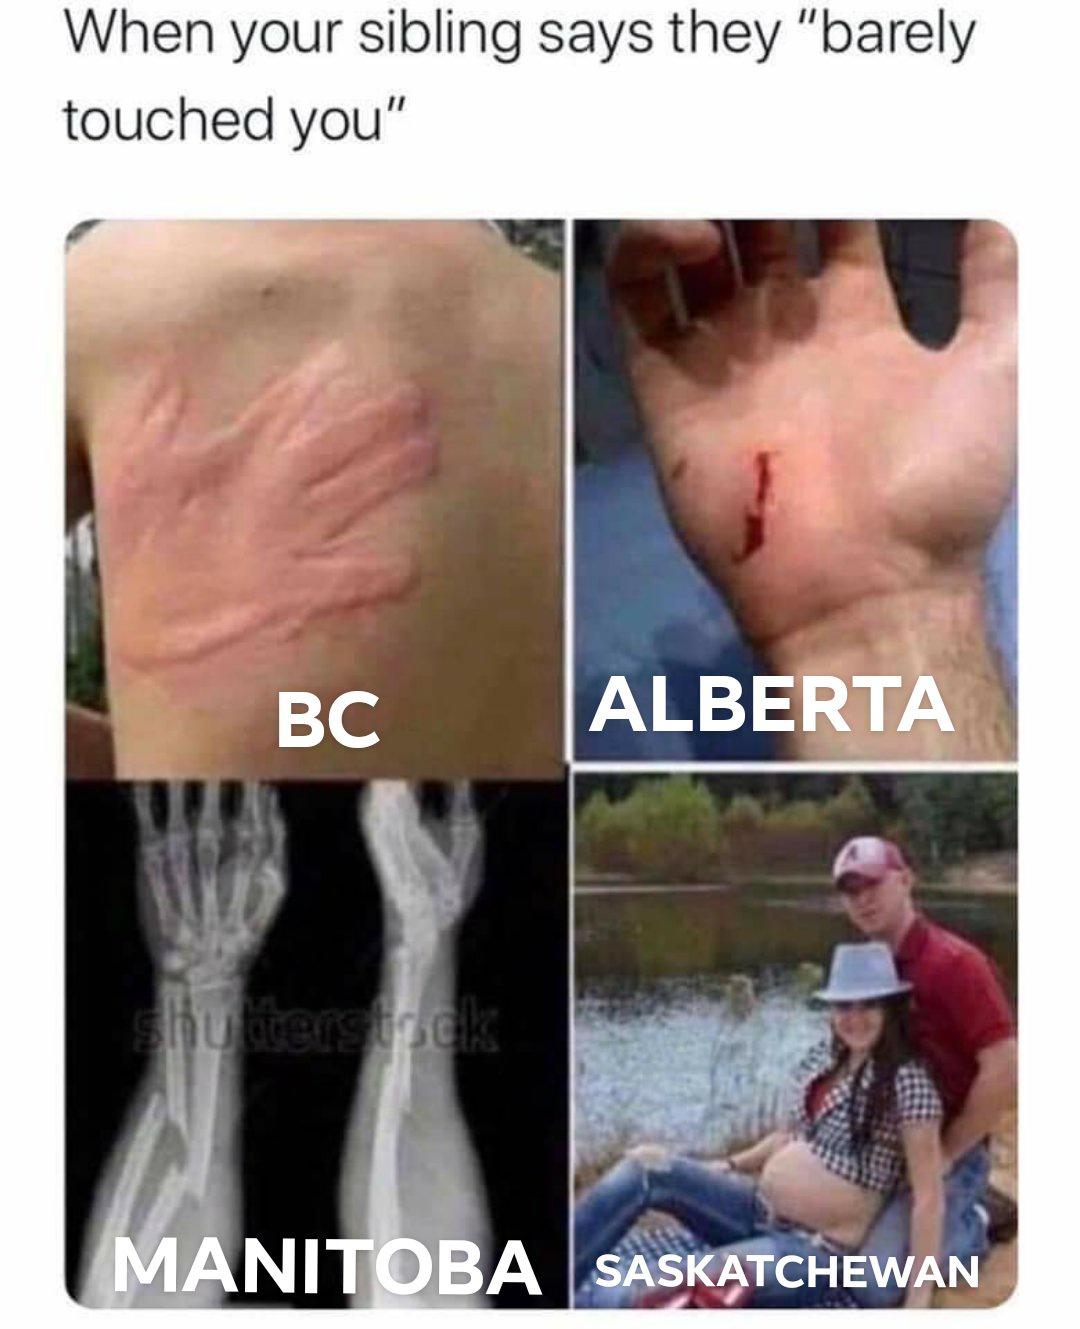 When your sibling says they "barely touched you" Bc Alberta shulter seks Manitoba Saskatchewan